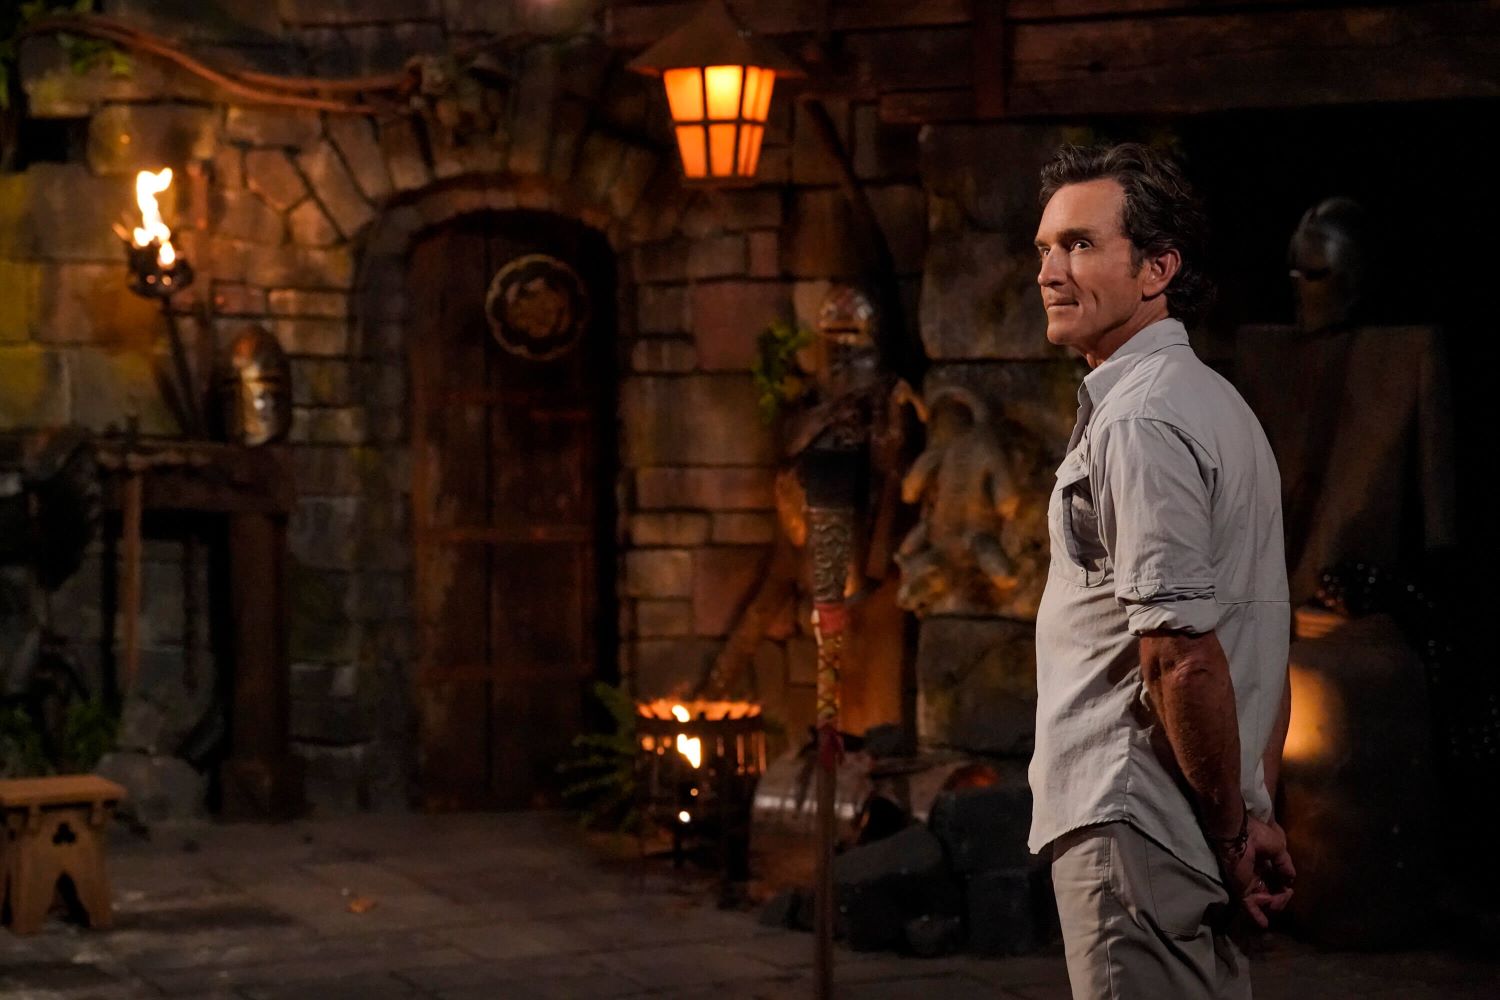 Jeff Probst, the host of 'Survivor' Season 44, attends Tribal Council wearing a light gray button-up shirt with rolled-up sleeves and gray pants.